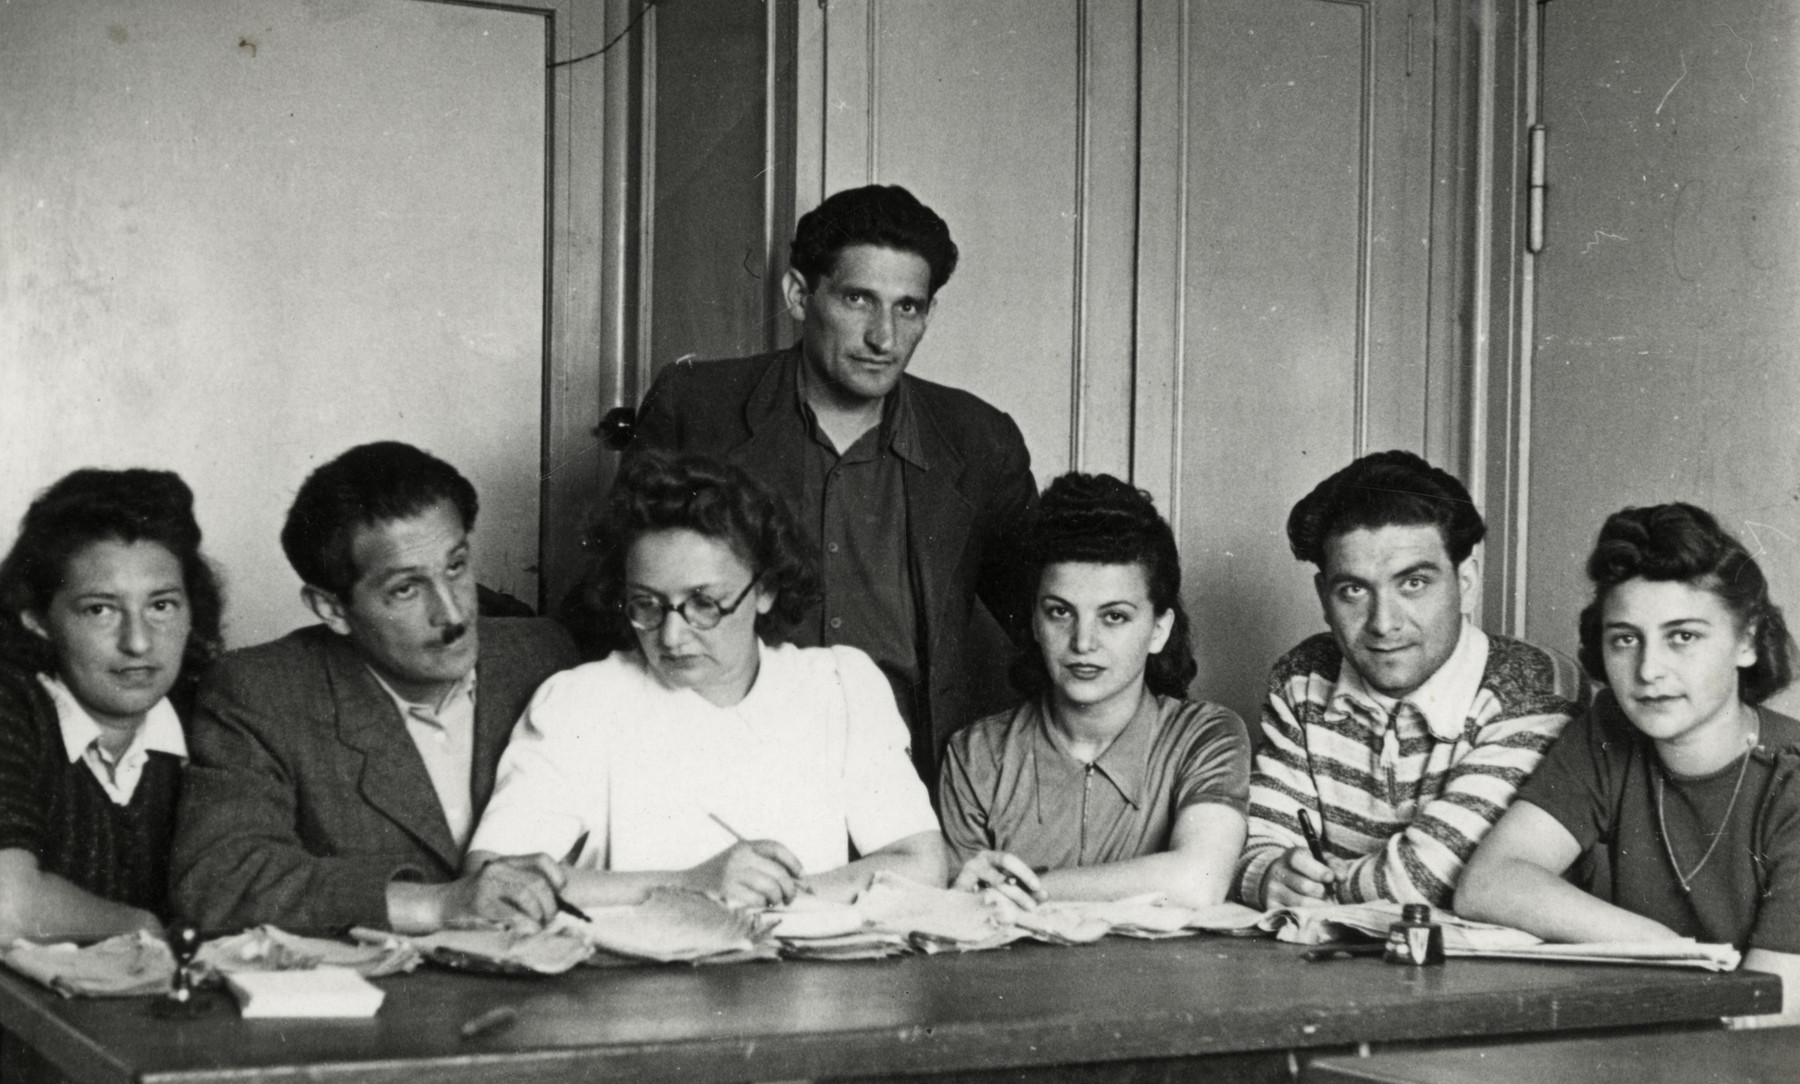 Office workers in the Schlactensee displaced persons camp work at a table. 

Among those pictured are Ms. Langsam (third from left), Mary Binder (third from right), and Rozalia (Krysia Laks) Lerman (far right).  Tuvia Grossman has also been identified in the front right.